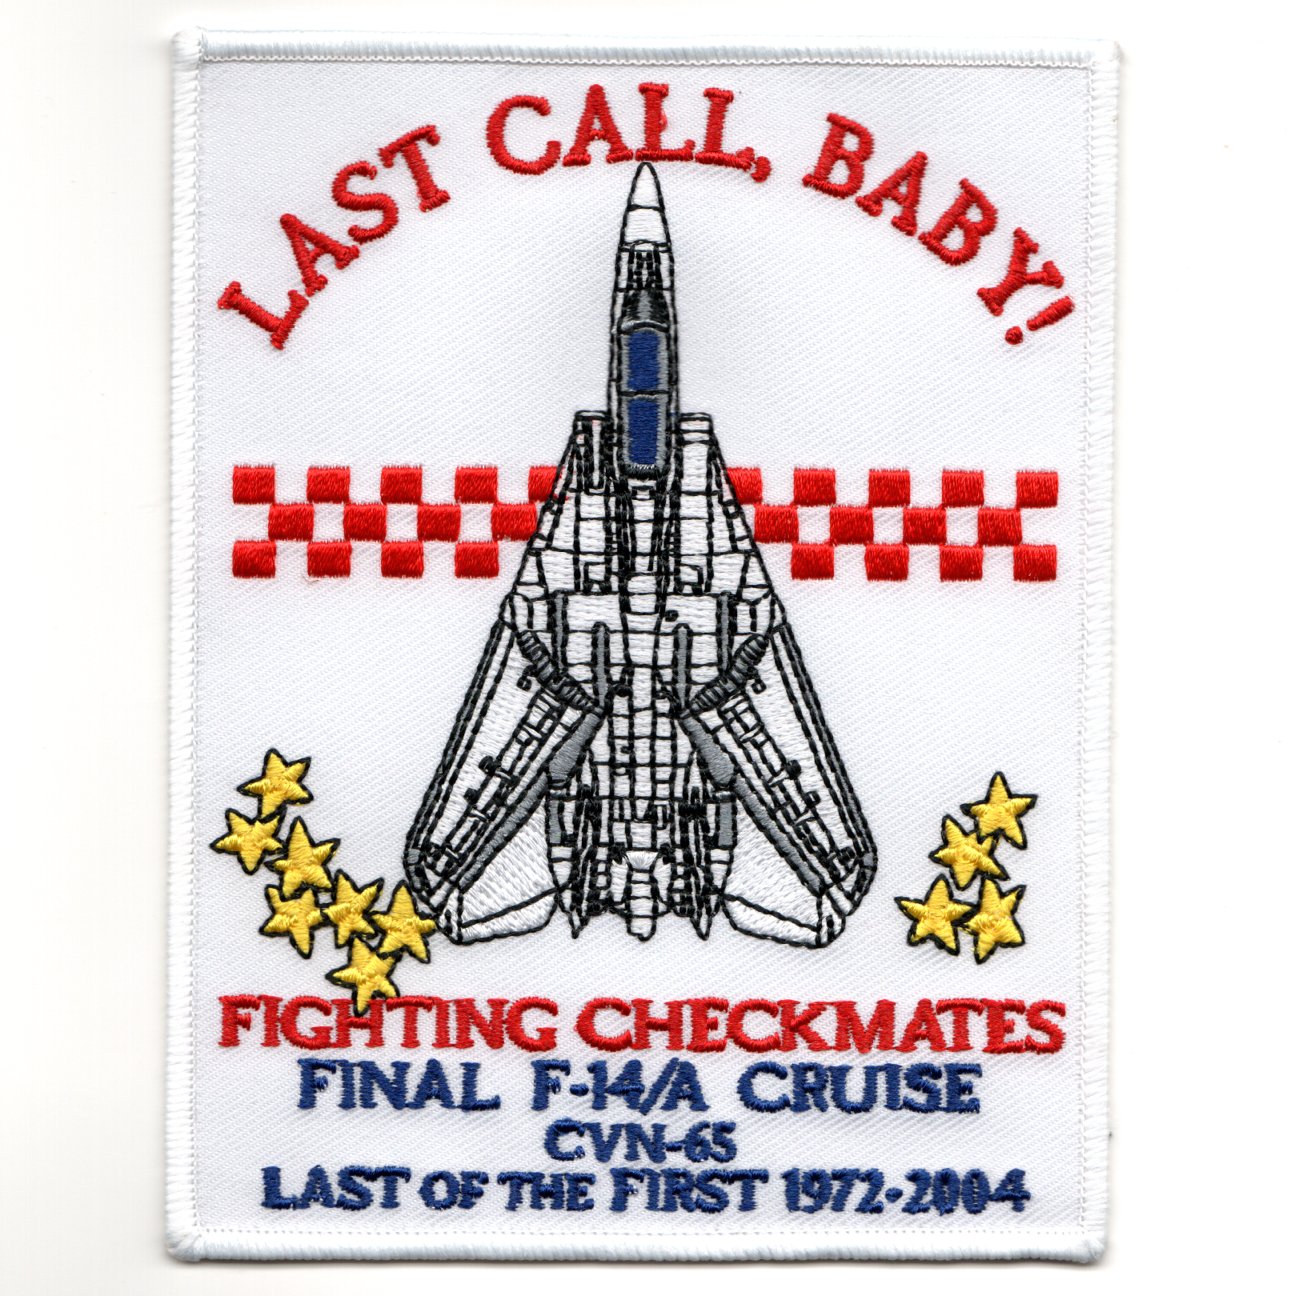 VF-211 2004 *LAST CALL* Patch (Large/White/Rect)